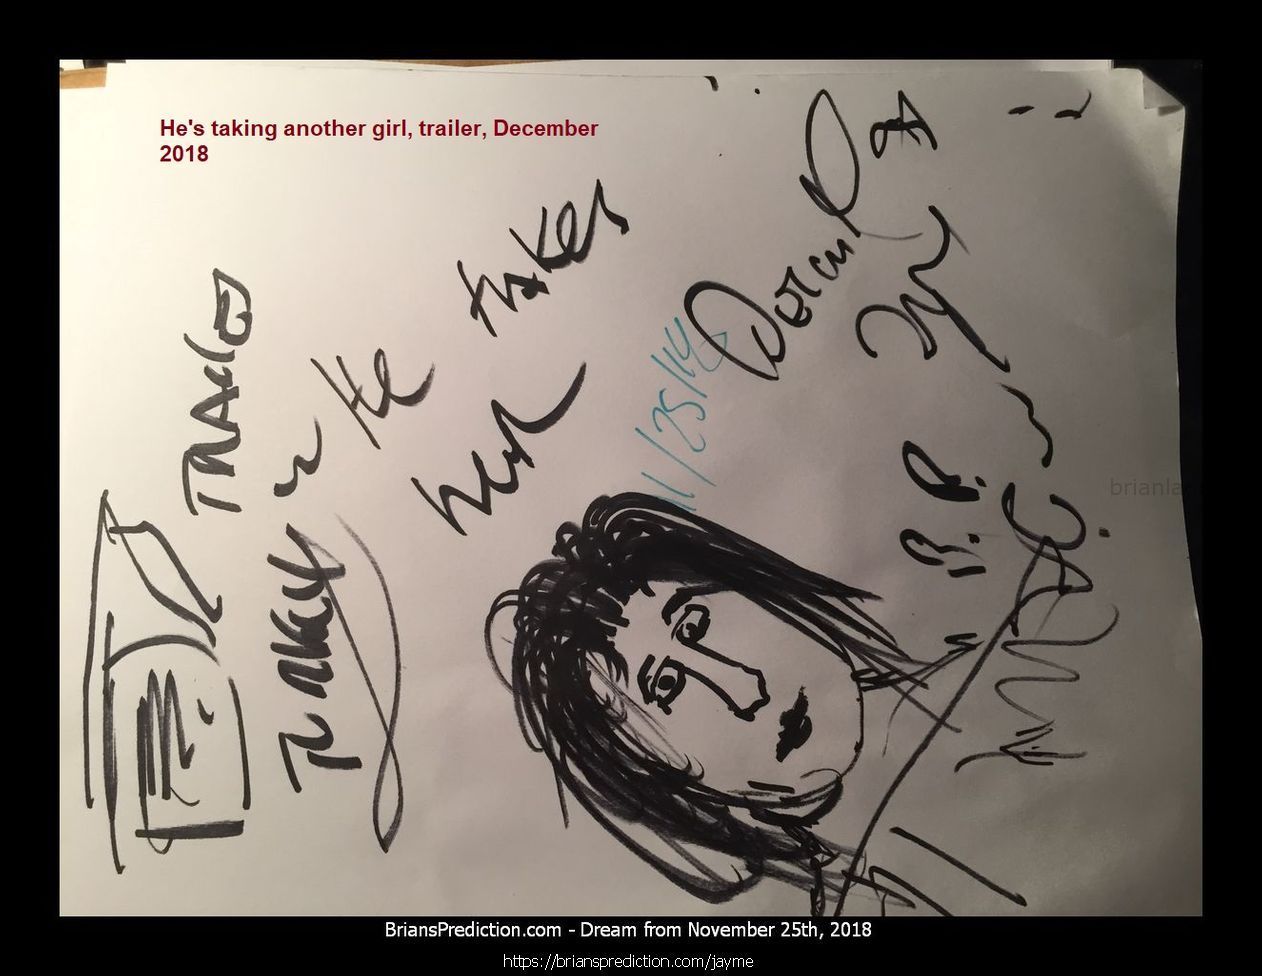 Jayme Closs Found 11367 25 November 2018 4 1 - 1/12/2019 These Are The Dream Drawings Related To Missing Teen Jayme Lynn...
1/12/2019 These Are The Dream Drawings Related To Missing Teen Jayme Lynn Closs The Murder Of  James Closs And Denise Closs (all From 2018)  I'M Aware Of Her Being Located On January 10th, 2019.  There Are Many Things That Do Seem To Make So Far And I Think There Is More To The Case Than Murder And Kidnapping And Lae May Be Missing Something Very Important And Involve Many More People  Will Post New Updates At   https://briansprediction.com/Jayme  Dream Text  Going To Kill Her, The Trailer Is At Cenex In Barron.  Jayme Closs, They Were In The House For 45 Minutes Before The Killings, Look Under The House Again.  Jaymee Closs Found, Go Back Look In The Crawlspace, The Phone She Used To Talk To Him Is There, Cars Unrelated, Motorcycle, Police Missed The Box?  Jayme Closs, Body Found 6 Miles From Home, January 12th, 2019, Lazy Eye, Returns To Home (this Is For January 2019 And Does Not Mean She Has Already Been Murdered)  Jaymee Closs Found, Look Again, Drove Right By The Trailer, Dallas (I Realize Dd Says Dallas, I Do Not Think This Trailer Is In Texas)  Jayme Closs Look Again, He'S Going To Kill Her On December 16th, Hania Aguila Killed December 25th, Numbers, Church, Trailer (may Not Be The Right Translation Of Last Nights Dream But I Will Be Posting Additional Dreams On These 2 Cases In A Few Day  Trailer, He Took Her Here, Hania Noelia Aguilar Found, Fire Tower, 27, More Numbers.  He'S Taking Another Girl, Trailer, December 2018  Mollie Tibbits Is Still Alive After Killing, Trailer, 27, 27, 57 Feet, Fire Tower, He Going To Take Another Girl - Always 2. I'M Aware She Is Not Alive And I'M Not Sure What This Means.  Hania Aguilar Case May Be Related To The Jayme Closs Case An Could Explain Why I'M Having So Much Difficulty Finding This Trailer.  Jayme Closs Is Still Alive In Trailer, Lacross Thee Dreams Are From November 11th - 13th 2018 And Are From My Hospital Room In Port Saint Lucie Florida. Please Visit My Site News For More Details On This Case At   https://briansprediction.com/News.Php  Jayme Closs, Police Are Withholding This Item, Someone Knows When She Had This, Drugs (meth) Are Being Shipped In And Out Of Turkey Plant In The Bird'S Cavities, Road Dogs Biker Gang.  Box In Truck, Colton Treu, Was In Rice Lake, Eau Claire, Refrigerated Trailer, Knows Where Jayme Closs Is?  The Man At Cameron? Who Will Go To James Closs'S Funeral Is The Same Man Who Has Jayme Closs  10/24/2018 From All Thee Dream Drawings (dd's) This Is The Trailer Jayme Closs Is Being Held In. Dd States That Le Already Searched The Area But Did Not Break The Lock, The Man Who Took Jayme Has The Only Key.  2018 2 Psychic Prediction.Jpg  Connersville, Numbers, Jayme Cross (this Is Important)  Jayme, Look Again, She Missed It (Jayme Cross Search Area Related)  October 23rd, 2018 Jaymee Closs News Report? Links To Auto Garage And Moms Boyfriend, Rice Lake.  This Is The Same Trailer Related To The Jayme Cross Case.  124 Files On 2 Page(S)  Engle Creek Springs, Jayme (maybe Related To Jayme Cross Missing Teen Case, This Is A Real Location Map Included)  Dark Blue Car, I'M In The Back Seat And This Is What I Can See, There Are Crosses Handing Inside The Car And On The Floor (this Is A Lucid Dream Form 10/19 Or 10/20 Of 2018)  Engle Creek Springs, Jayme (maybe Related To Jayme Cross Missing Teen Case, This Is A Real Location Map Included)  Missing Teen Jayme Closs I Believe Will Be Located Shortly, I Will Post What I Can At   https://briansprediction.com/Jayme Expect Some Sort Of Update By Le On October 23rd And Much More To Follow!  Jayme Closs And The Deaths Of James Closs And Denise Closs 11185 16 October 2018 1 Psychic Prediction  Mithe Cartel Did Not Do This, Grain Silo (this May Or May Not Be Related To A Missing Person Case Jayme Closs)  Auto Garage And Flags Metal Rebar, Jayme Closs Would Walk Her To See Him, Go Back, Numbers.  Aka? Dawn Gordon Jayme Closs, Id, Renee Is A Hero, Rx (no Clue How This Is Related To Jayme Closs Missing Girl Case Unless Its Another Jayme, Awful Dream Though)  Road Block ??? Wisteria Lane South West In Adamsville, Missing Girl Jayme Closs With Steven K.  Jayme Closs, Wrong Information, She Had More Than One Fight With Her Parents, Look In Her Room Again (whatever Was Found In Her Room By Le Has More To It And Will Provide A More Accurate Location Than What They Are Going By Right Now)  Eau Claire, Jayme Closs Deerfield Road?  Missing Jayme Closs And The Deaths Of James Closs And Denise Closs.Jpg  Jayme Closs Search Map  Dna Of Steven Procopio Fount At Home Of James And Denise Closs In The Bathroom.  Jayme Closs And The Deaths Of James Closs And Denise Closs 11185 16 October 2018 1 Psychic Prediction.Jpg  These 2 Dd'S (dream Drawings) From 10-16-2018 Are Related To A Missing Girl Named Jayme Cross, I Have Opened A Case File Located At   https://briansprediction.com/Jayme  Jayme Closs And The Deaths Of James Closs And Denise Closs 11186 16 October 2018 2 Psy
